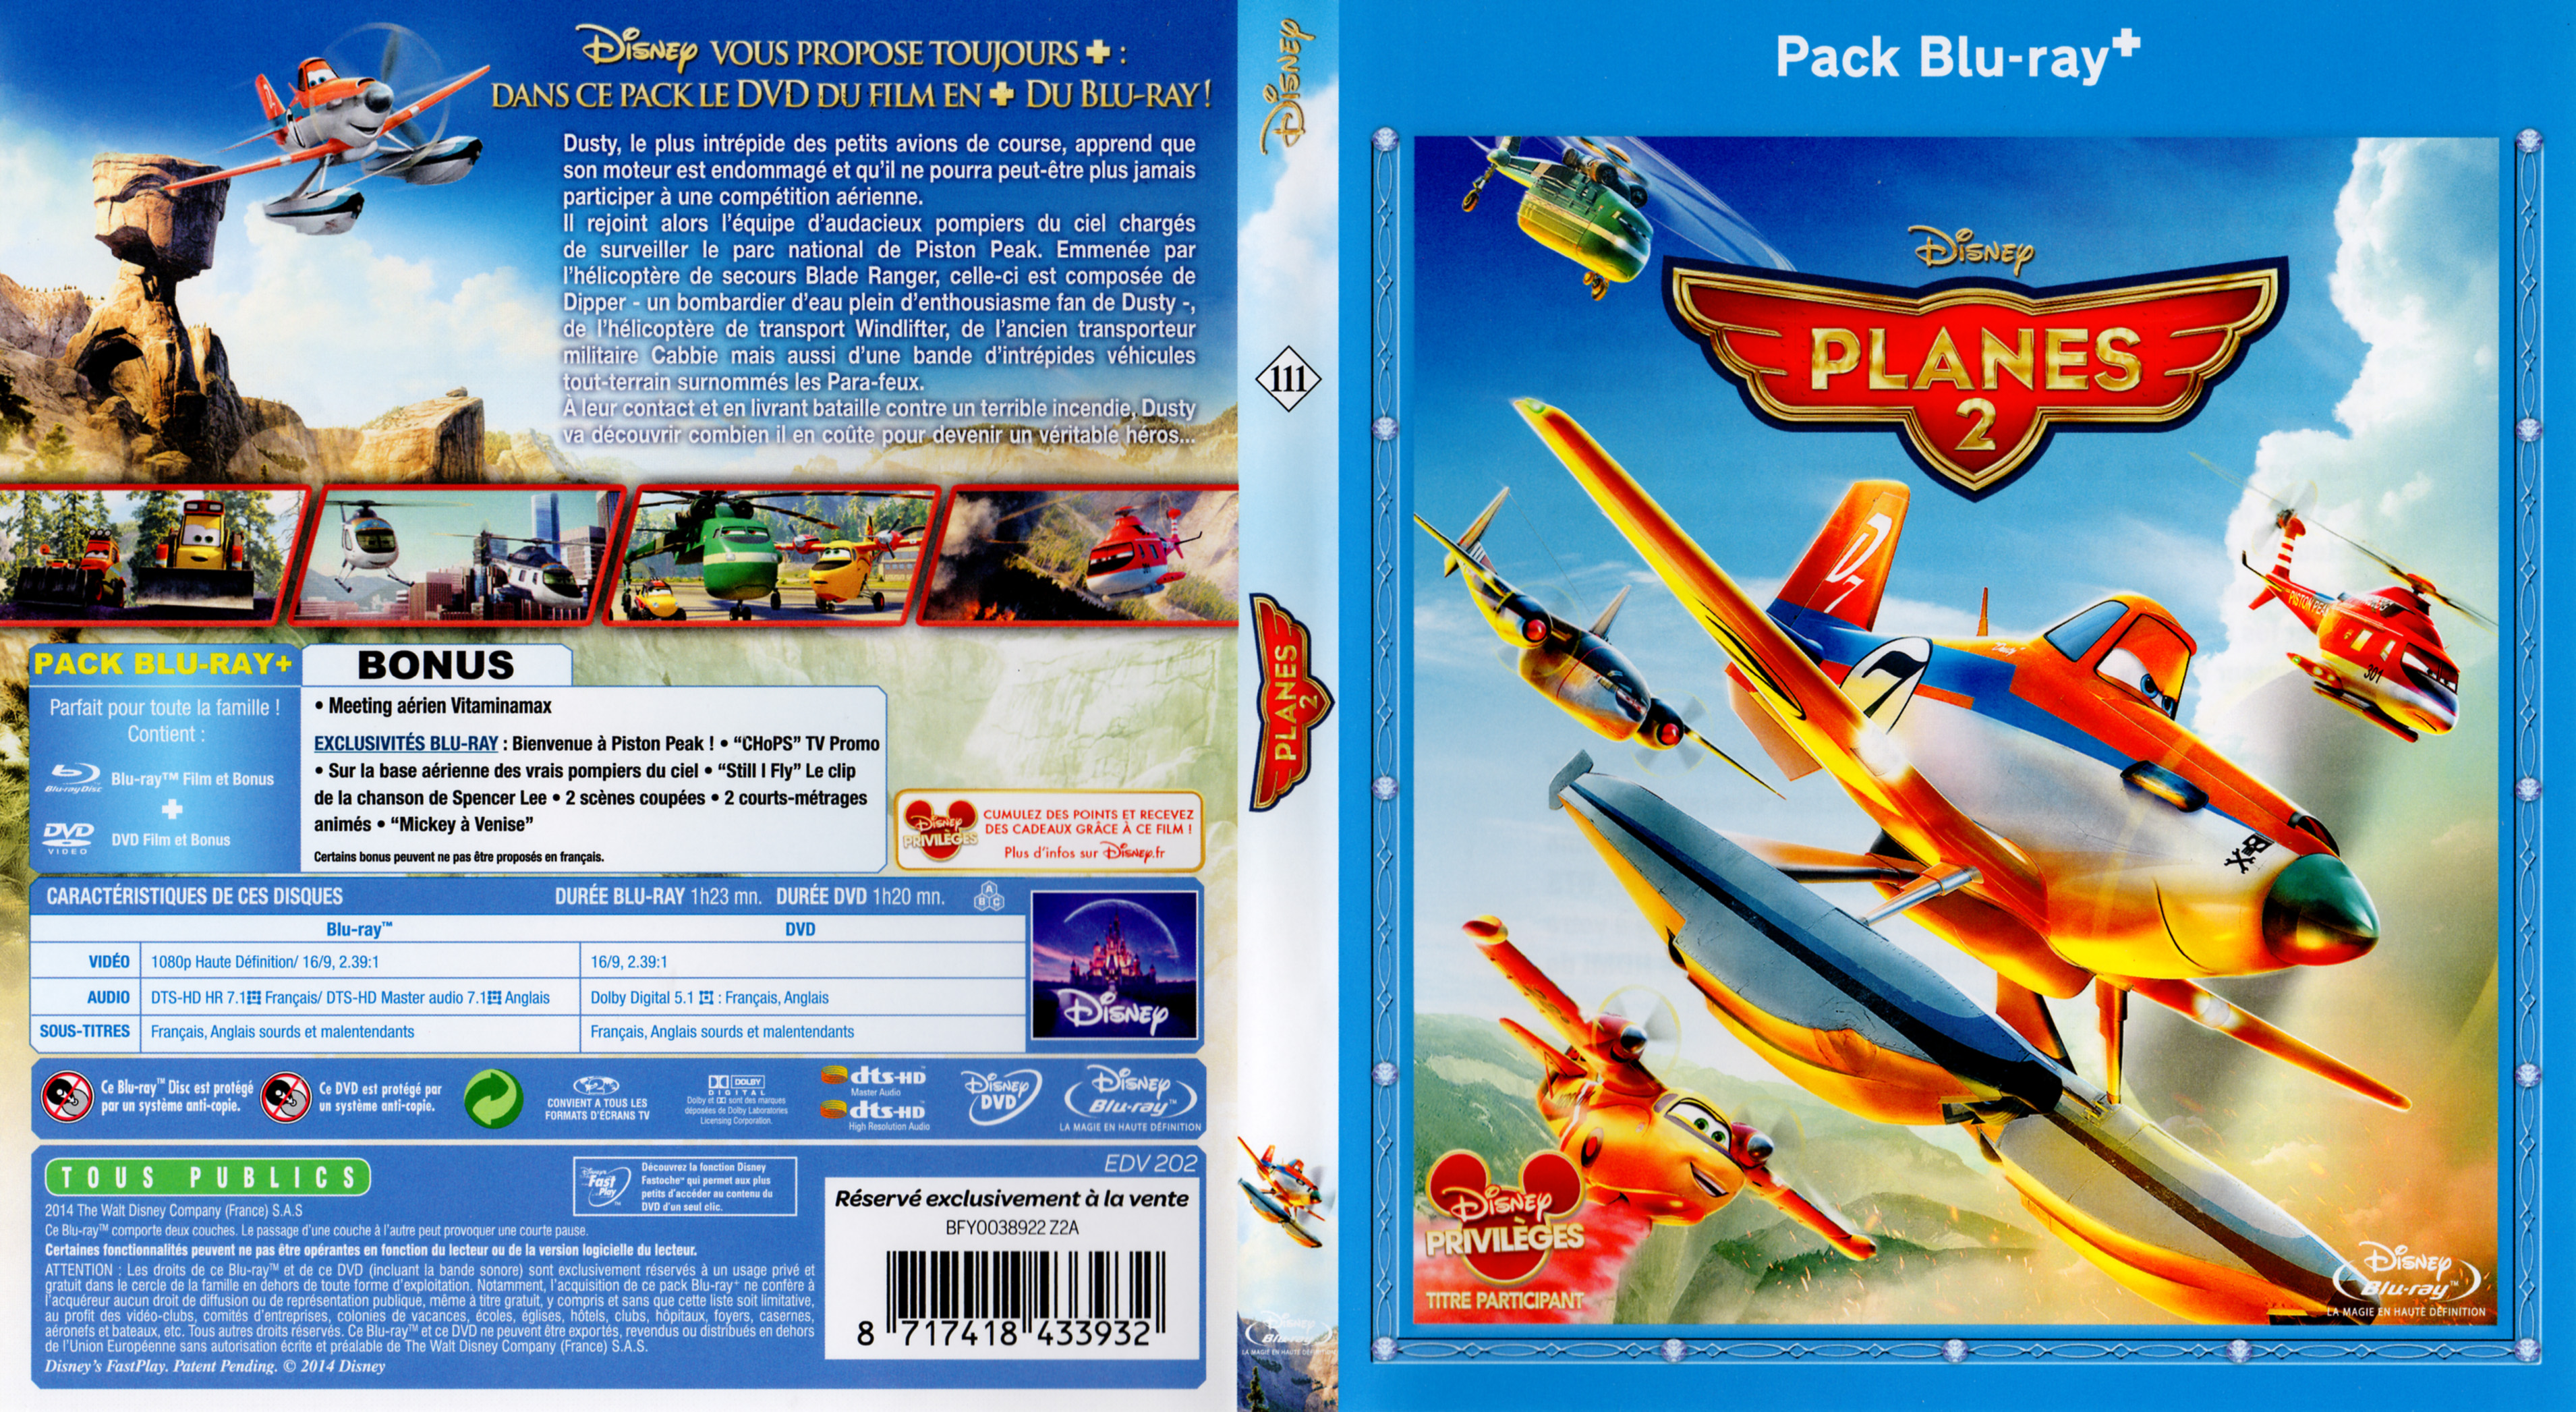 Jaquette DVD Planes 2 (BLU-RAY)